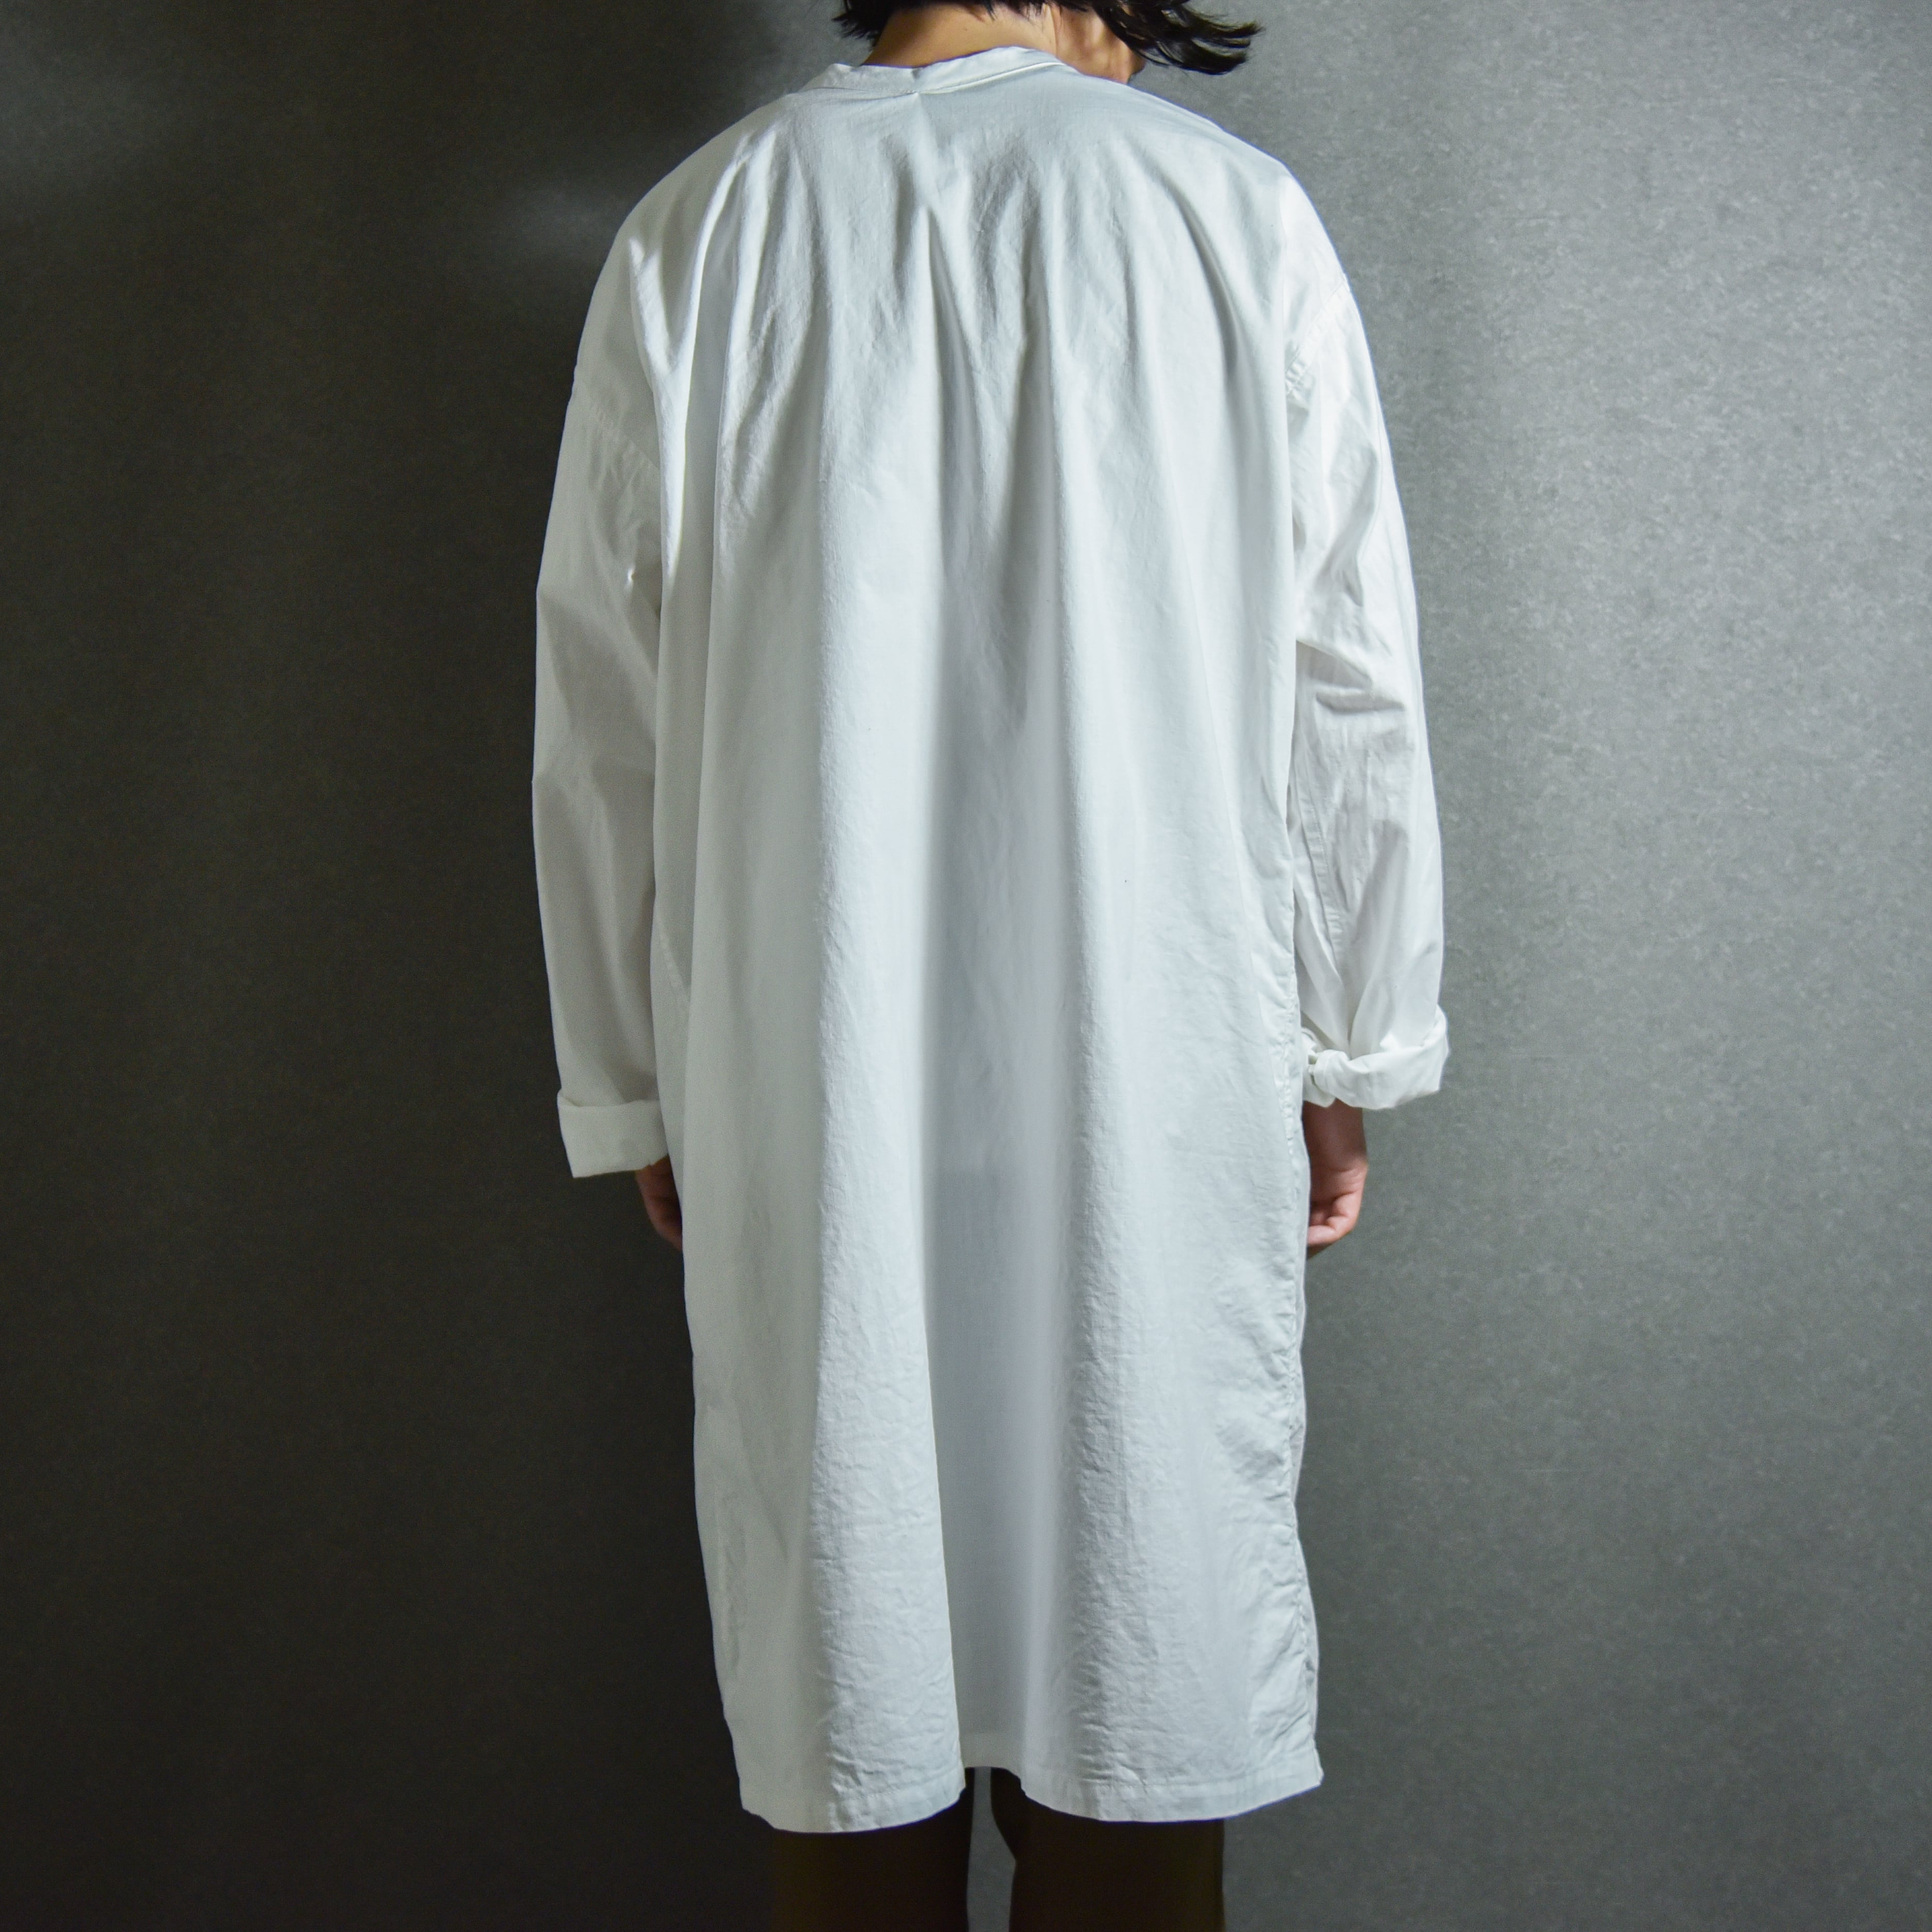 DEAD STOCK】Swedish Army Surgical Gown スウェーデン軍 サージカル 